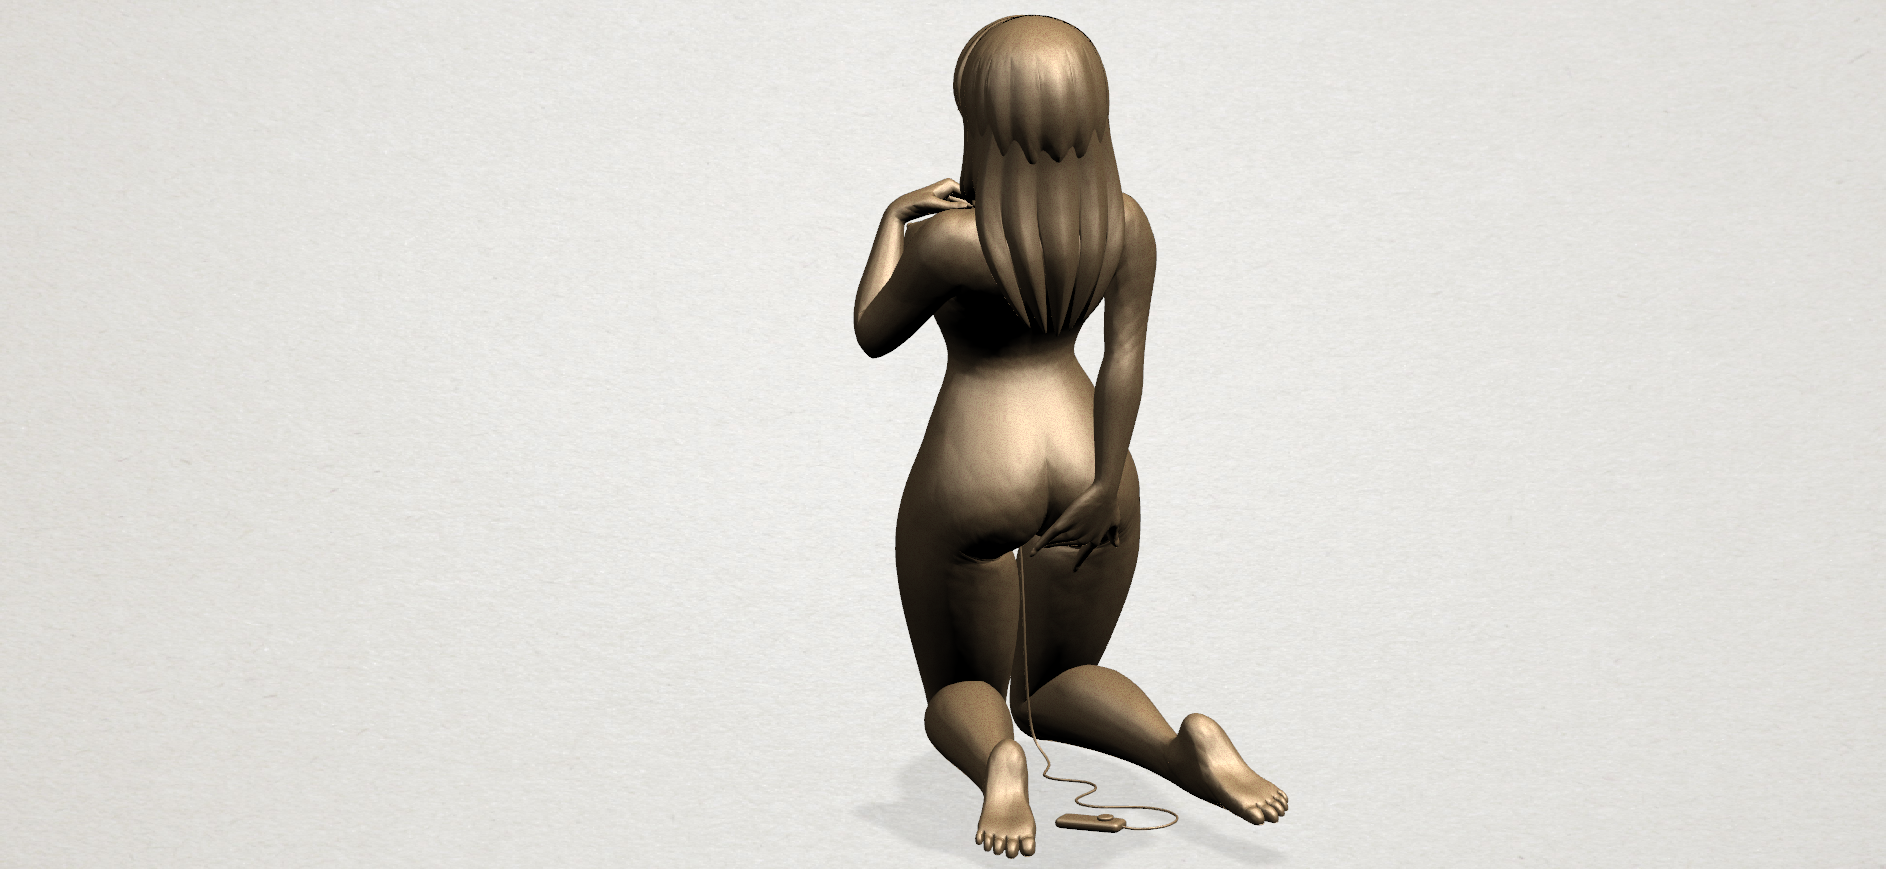 3D Printed Naked girl - bended knees 01 by miketon_mike Pins